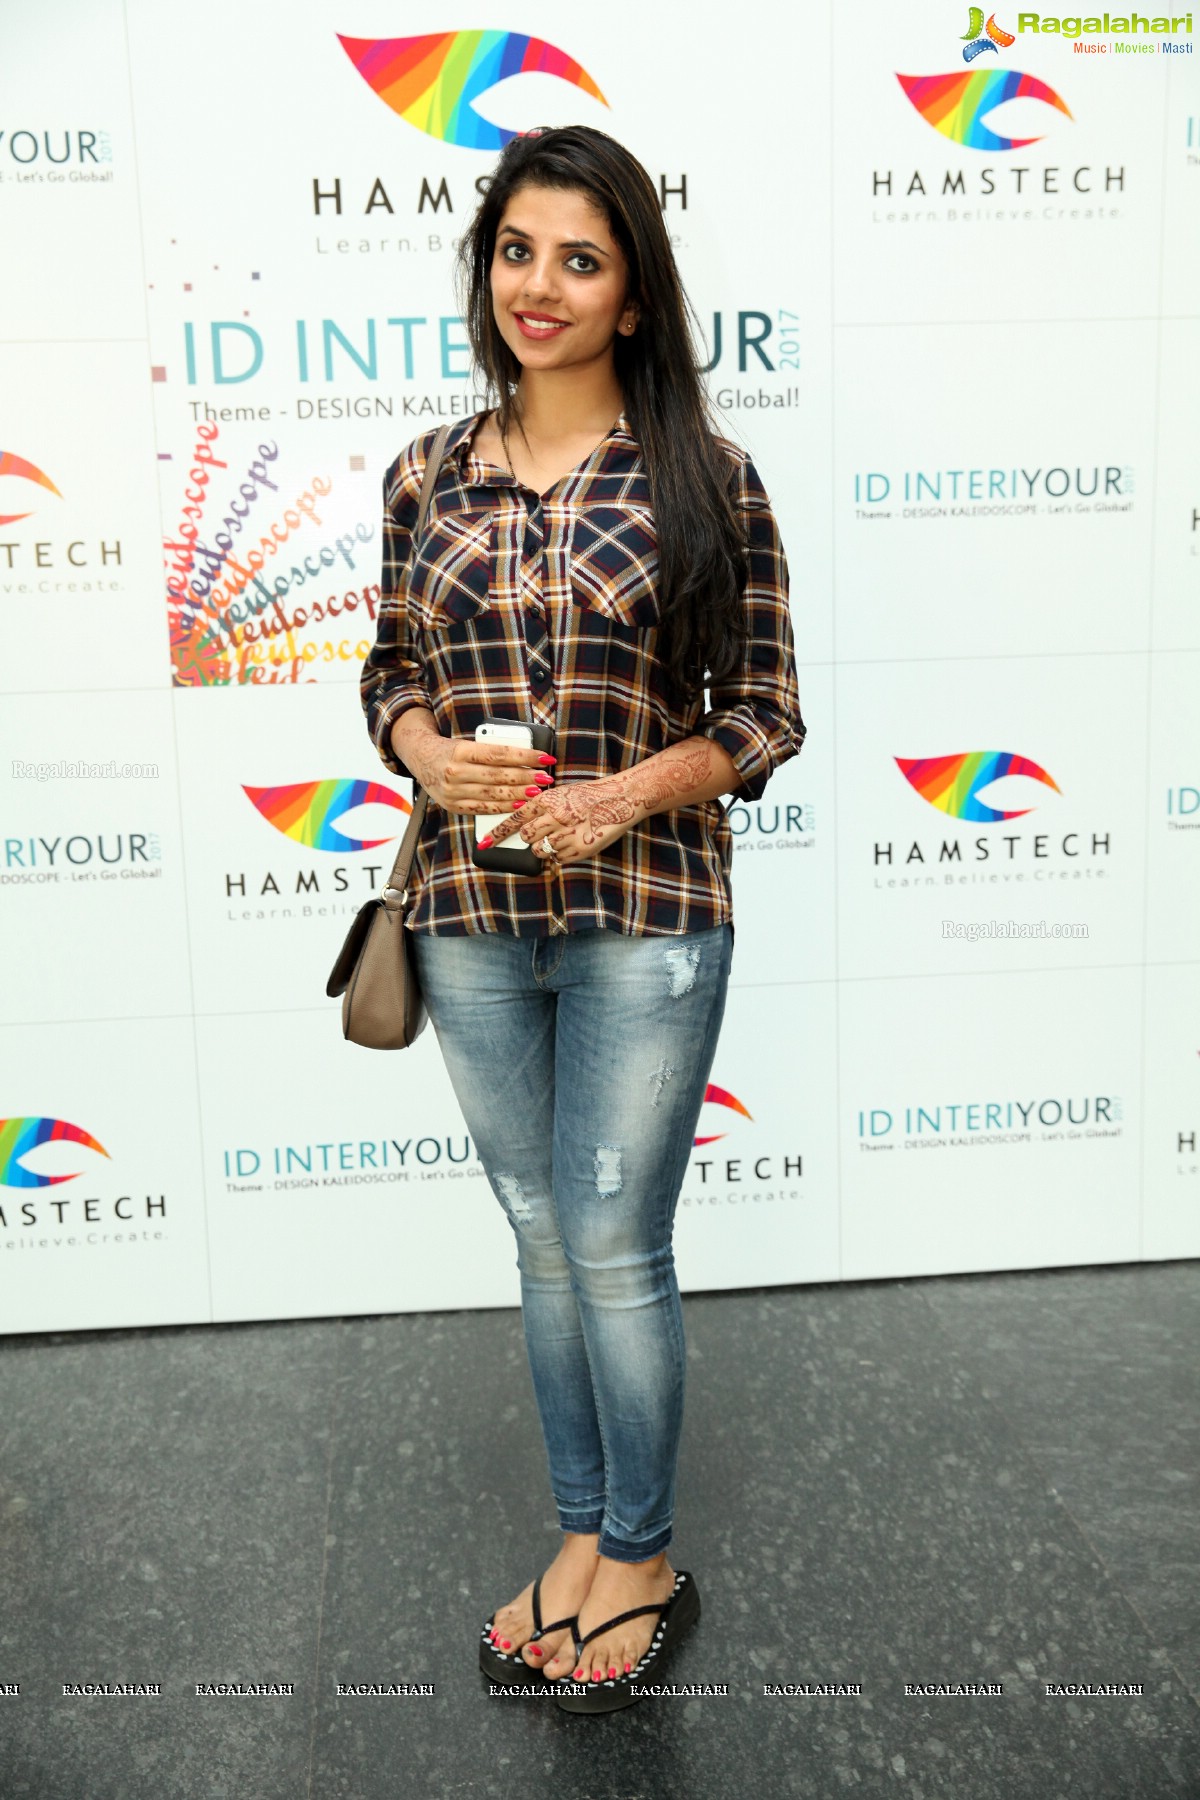 InteriYour 2017 by Hamstech at N Convention, Hyderabad